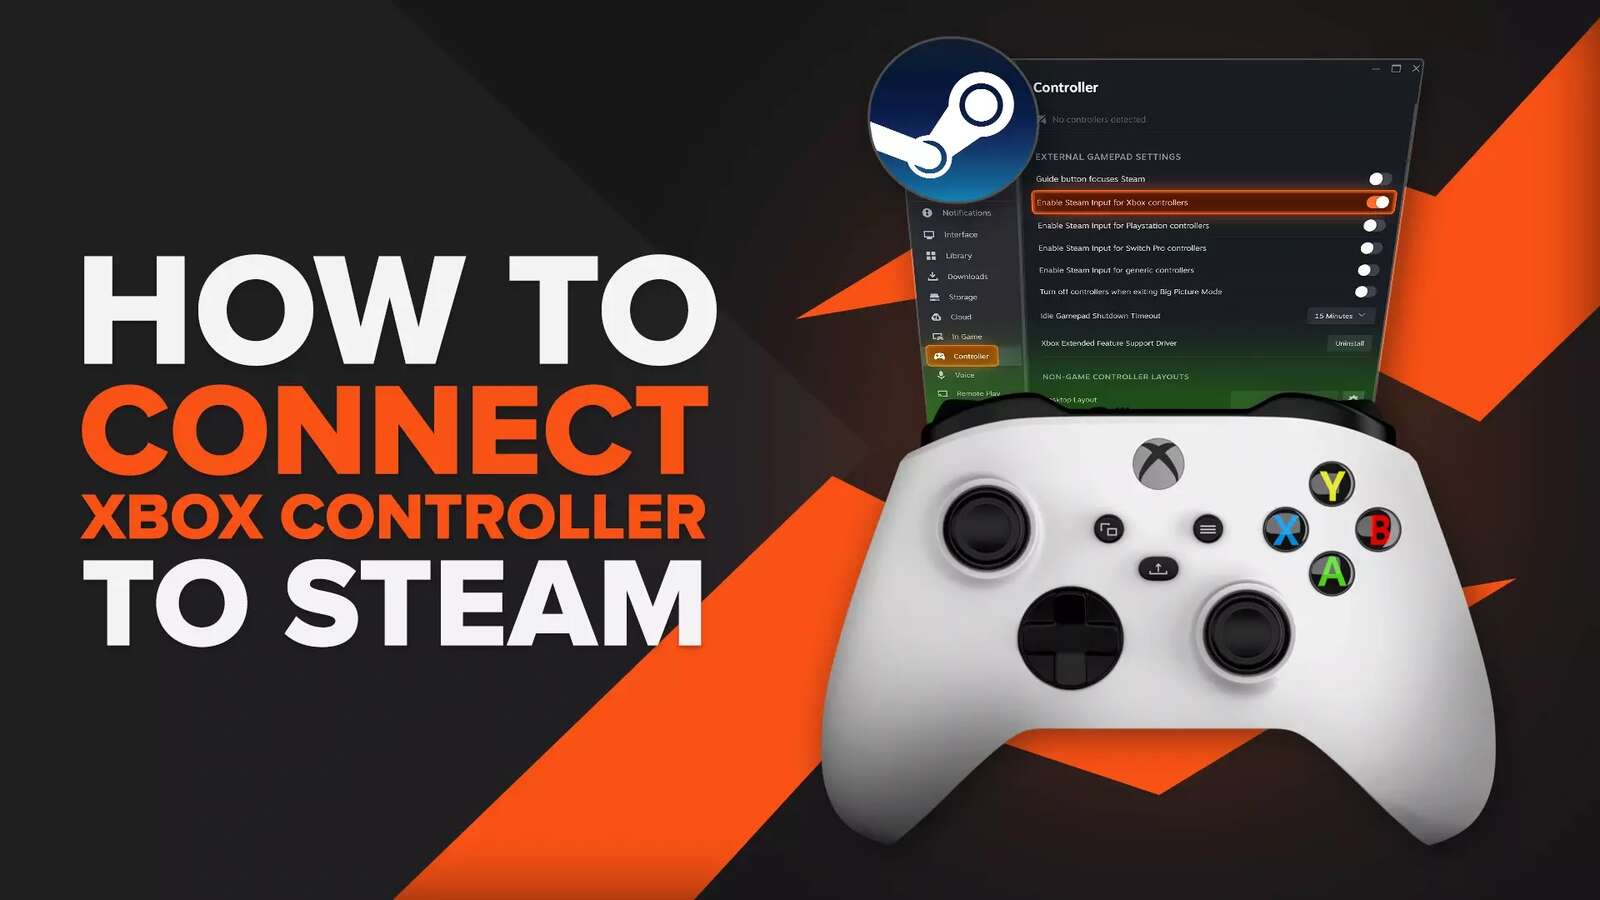 How to Easily Connect an Xbox Controller to Steam on PC